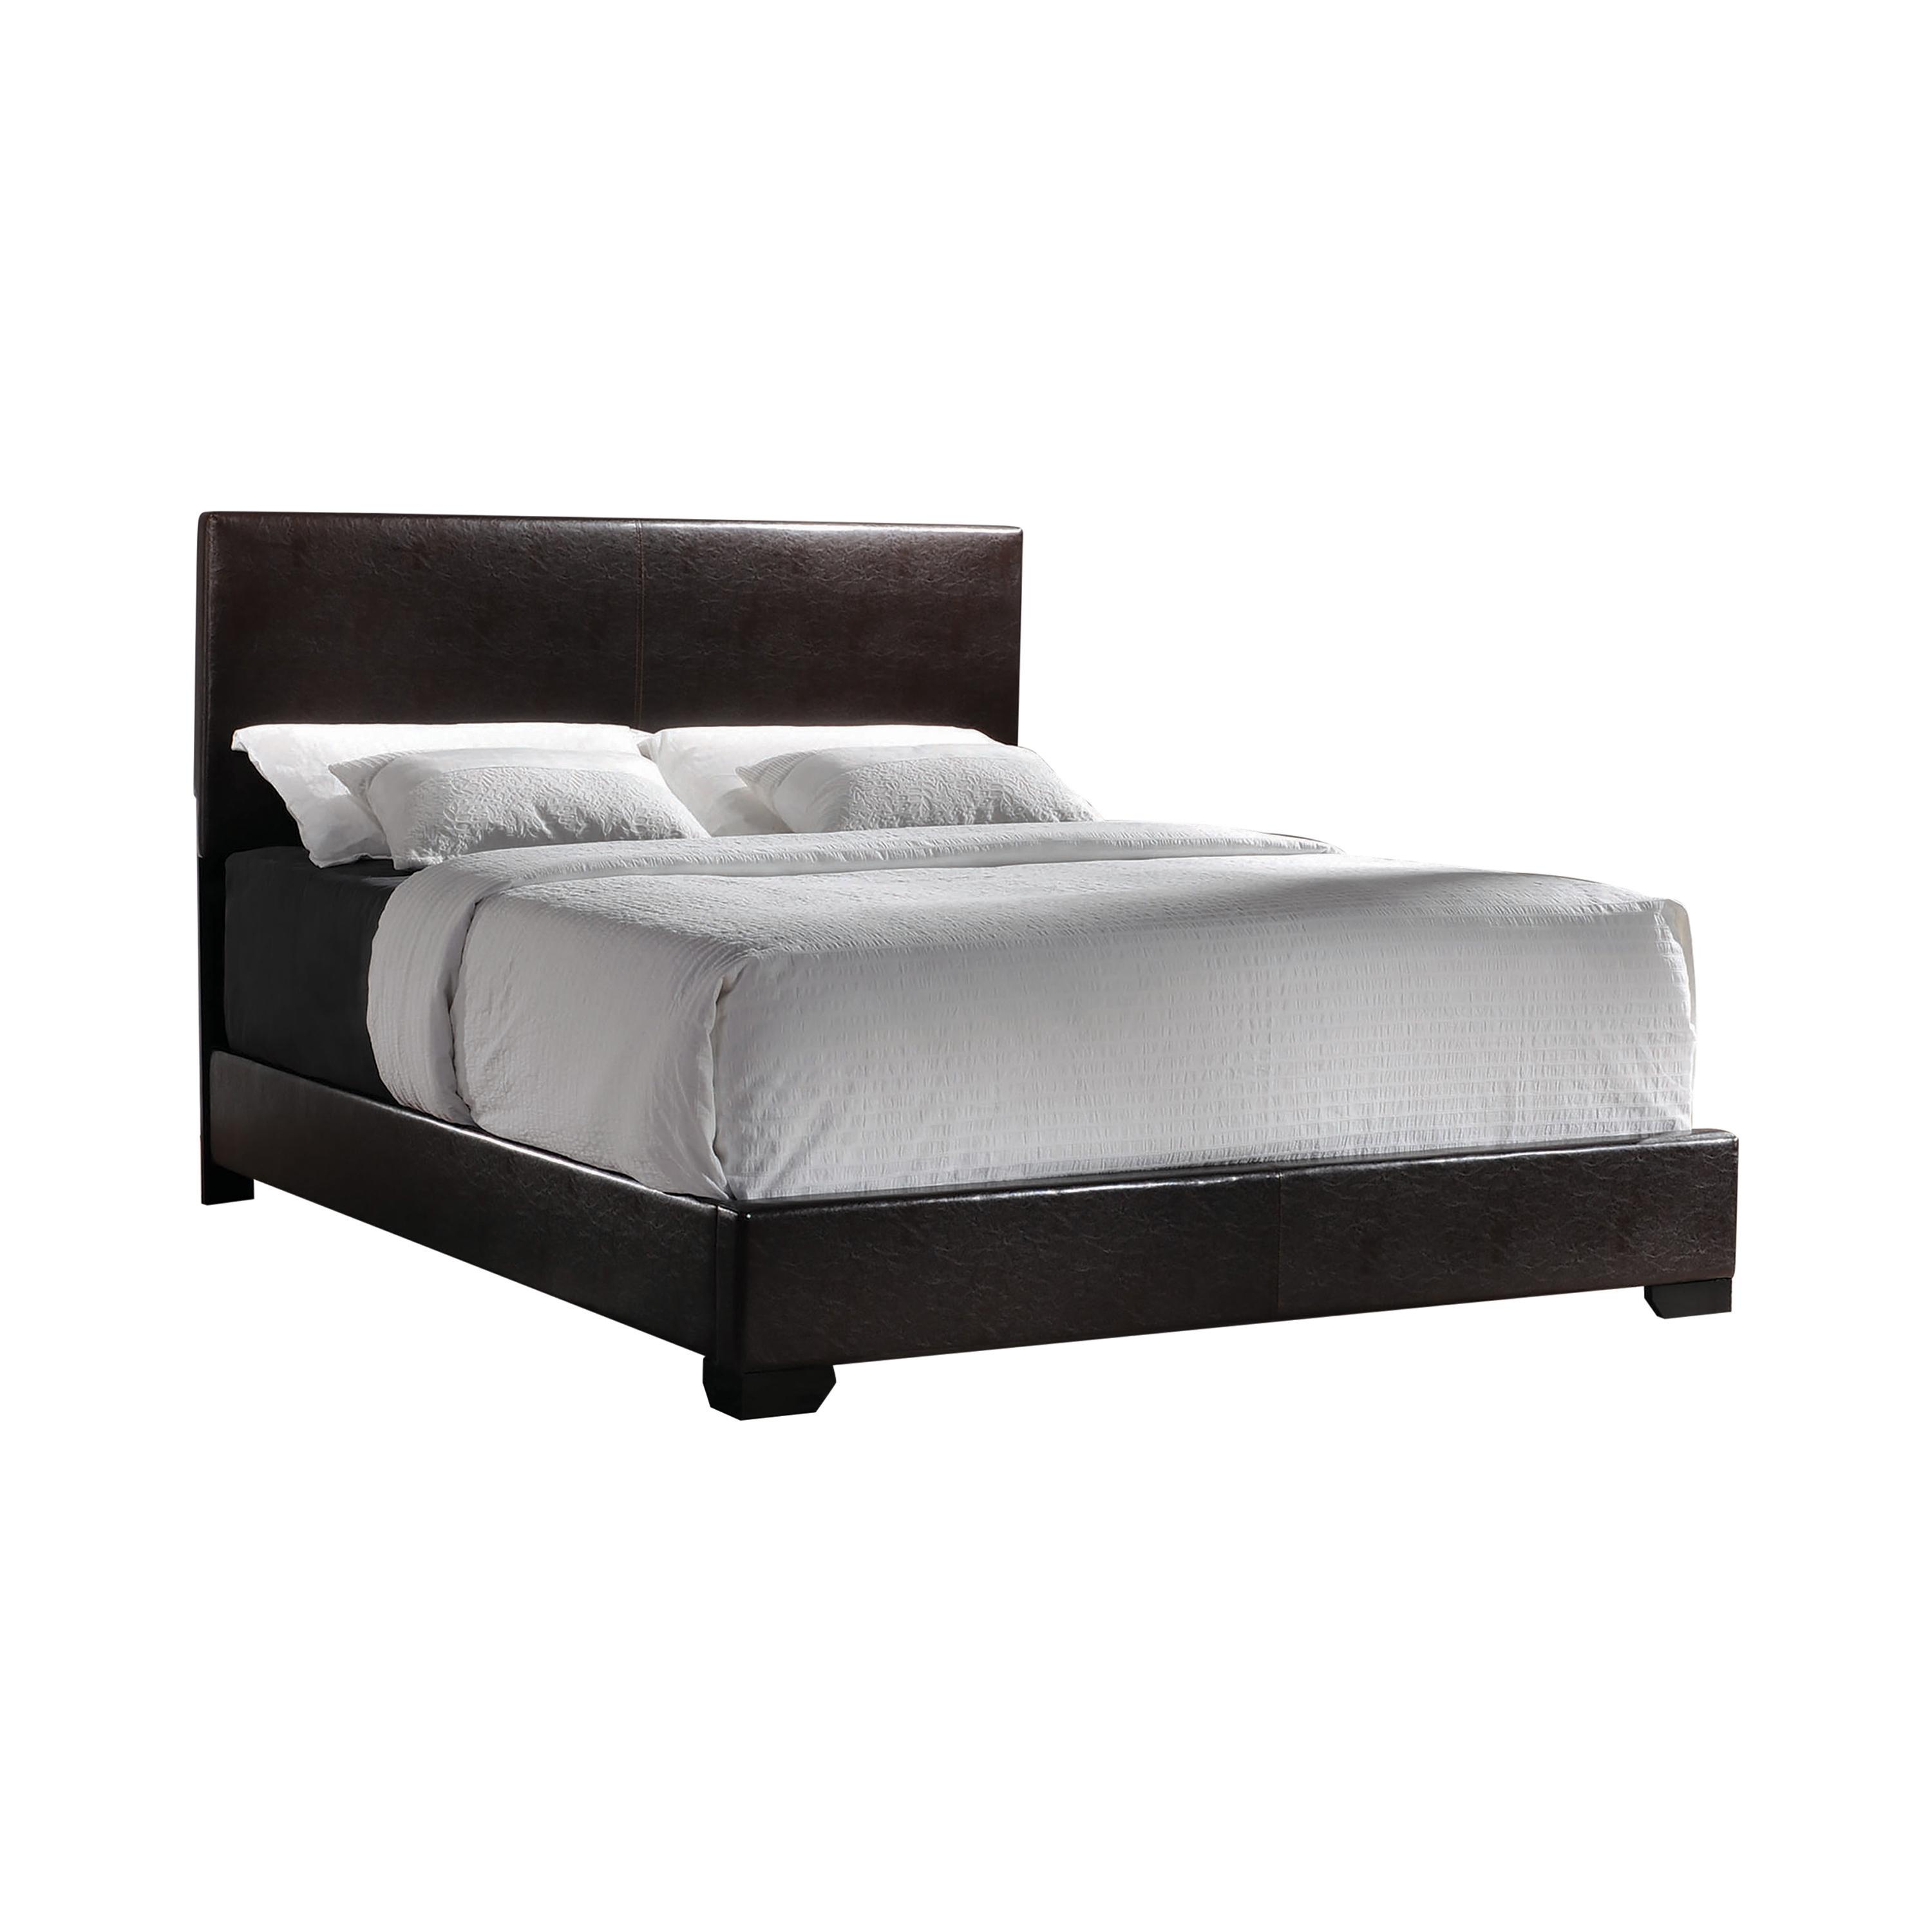 Modern Bed 300261F Conner 300261F in Dark Brown Leatherette